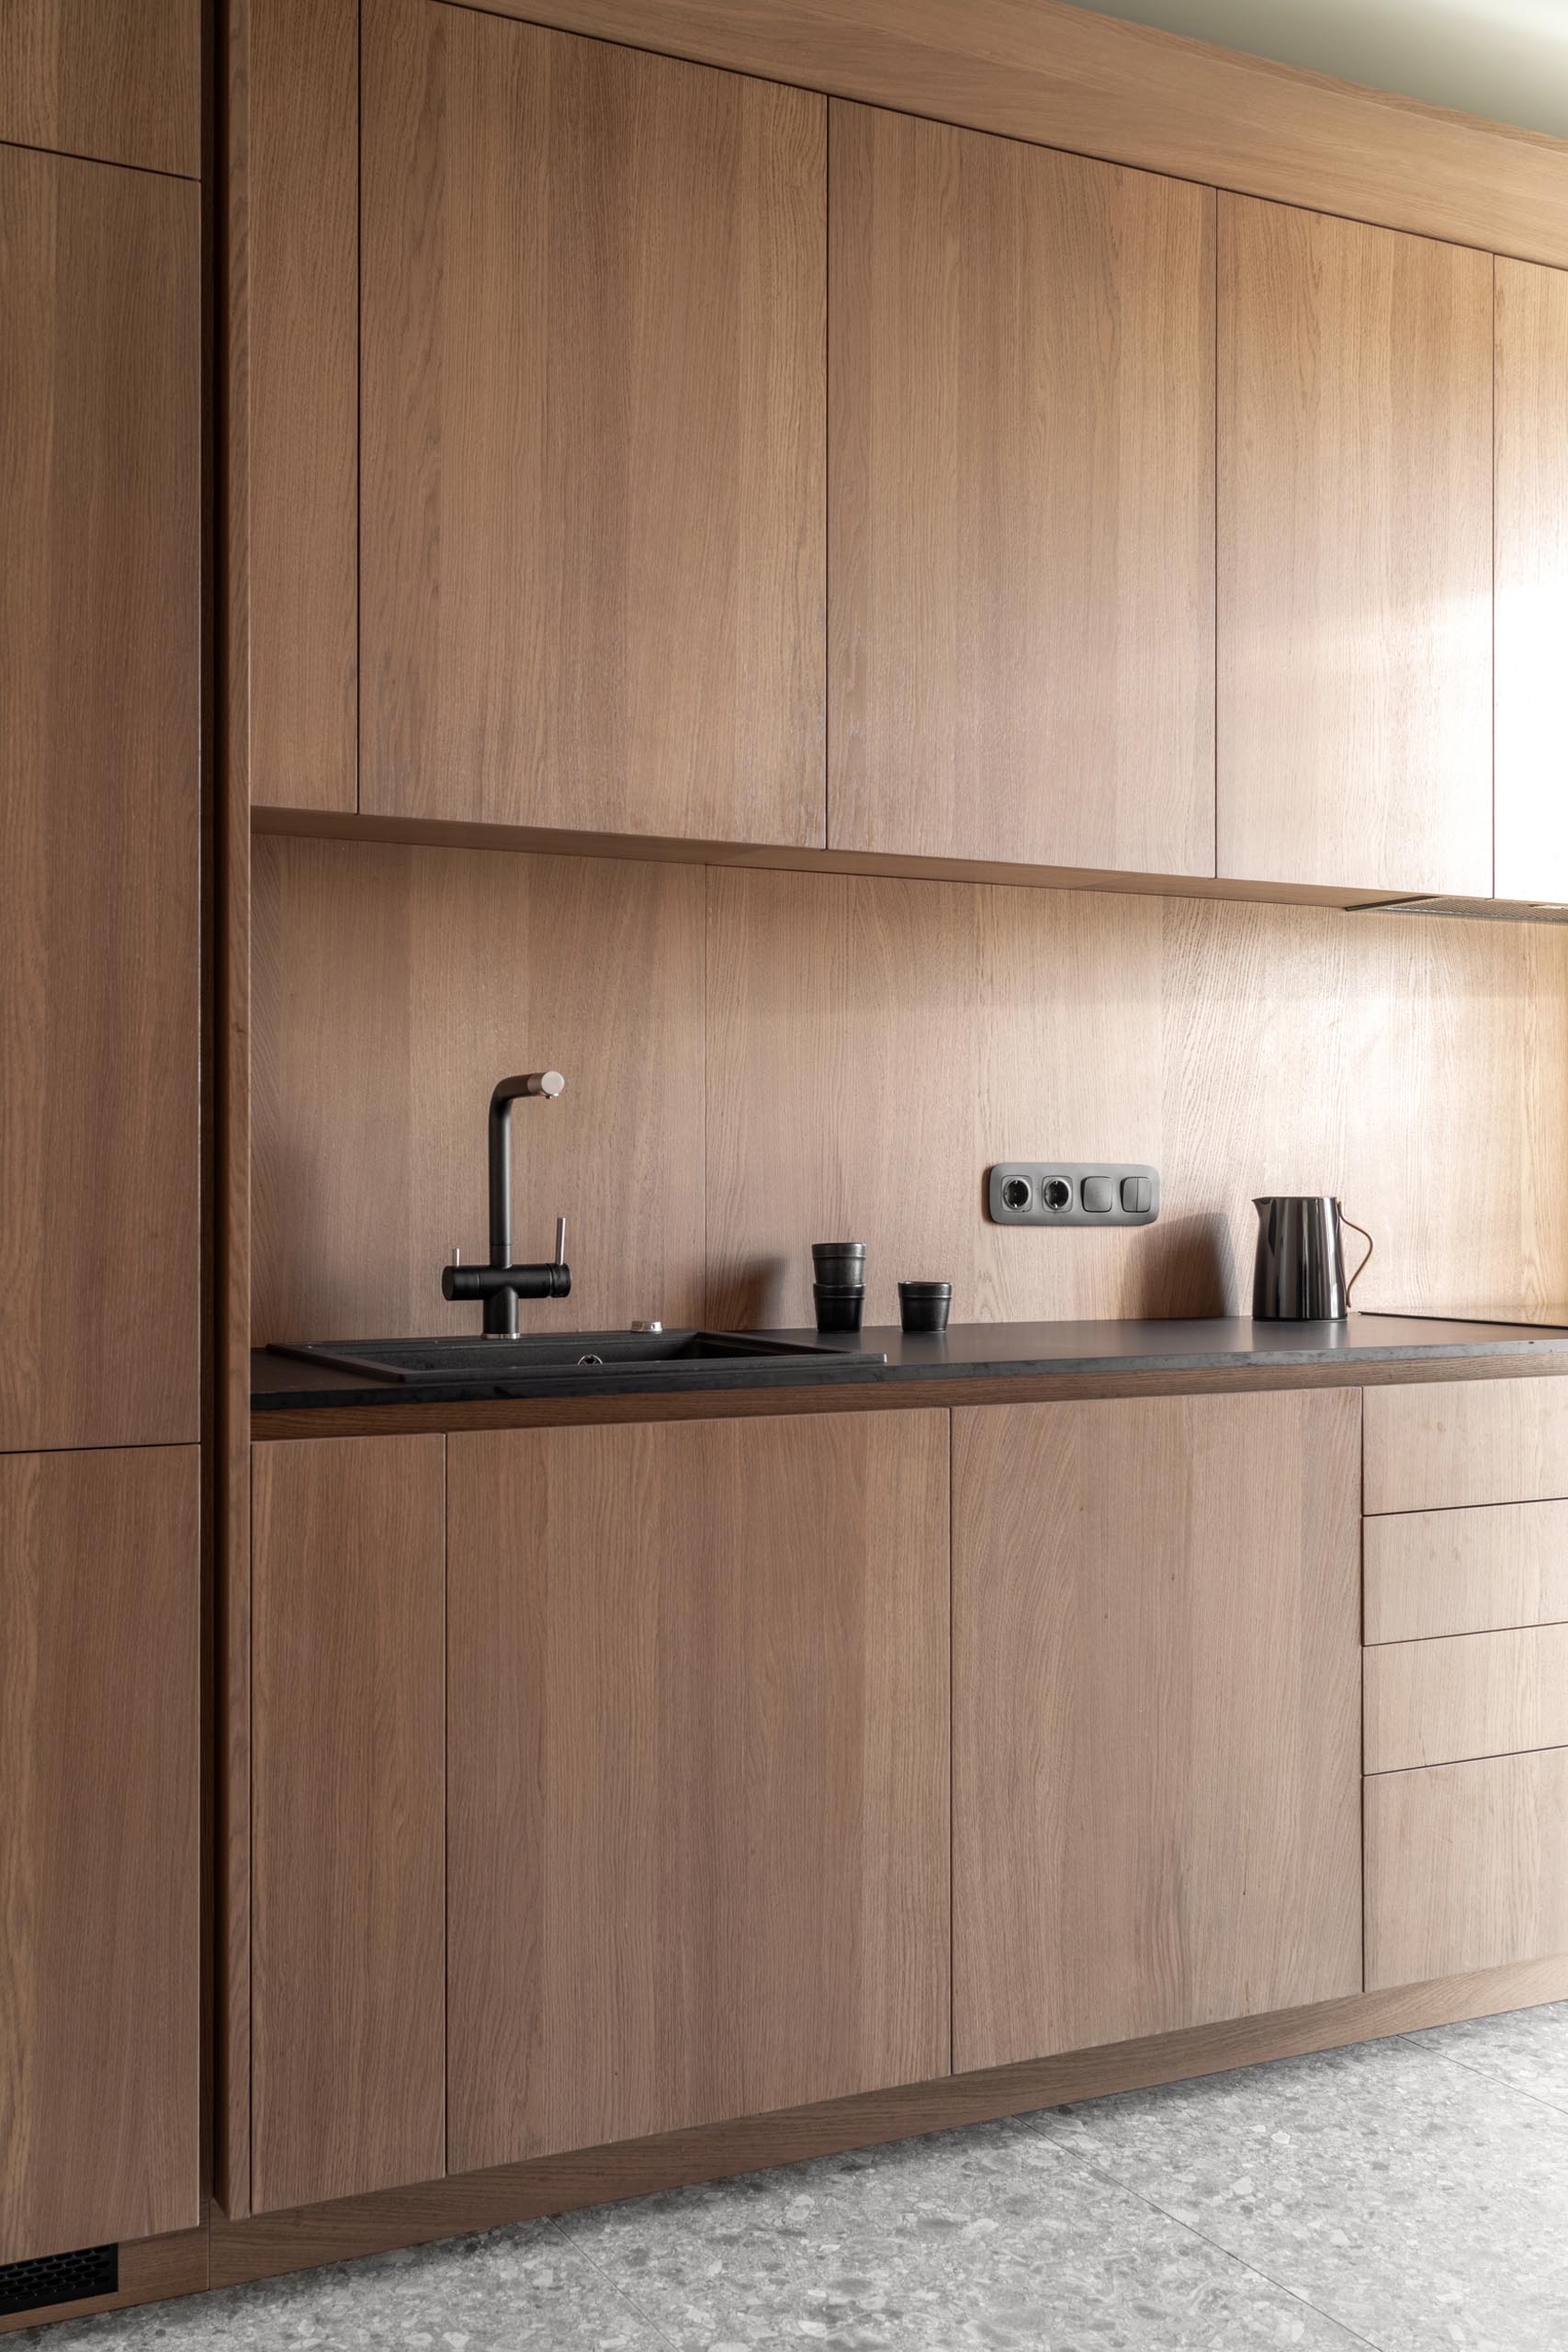 Wood Cabinets Without Hardware Are A, Images Of Modern Wood Kitchen Cabinets